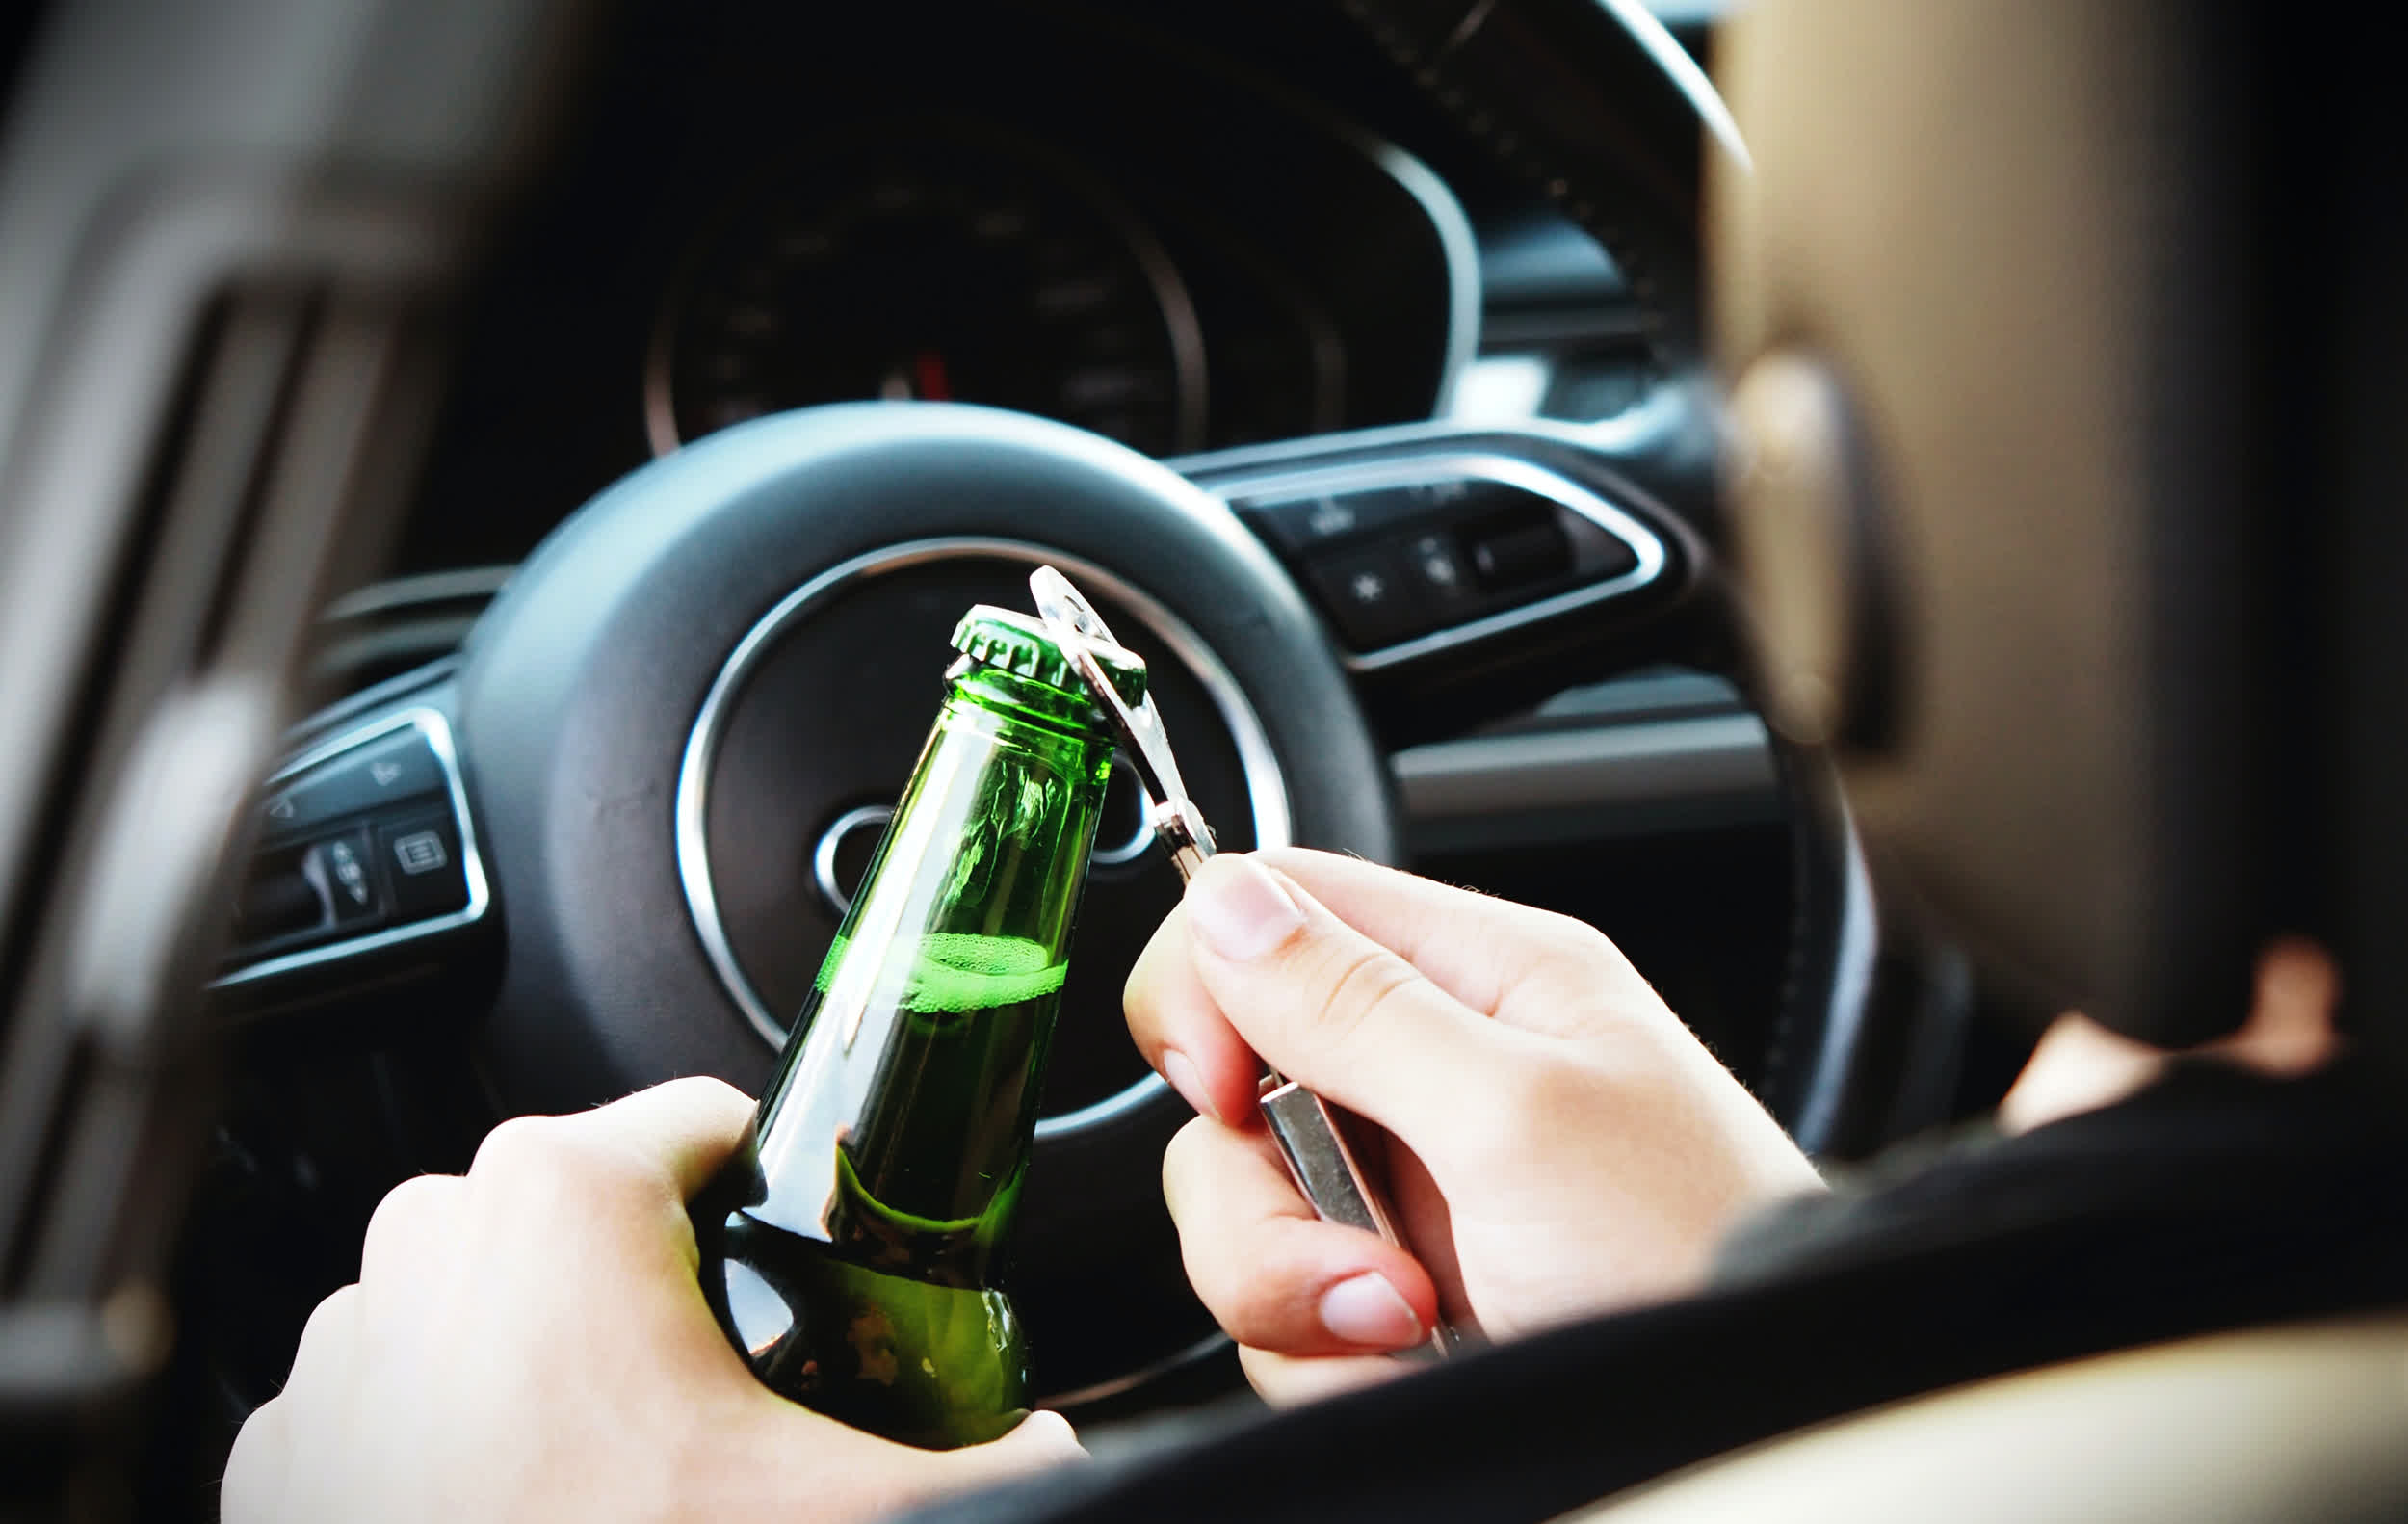 NTSB calls for all new vehicles to leverage tech to prevent drunk driving and speeding